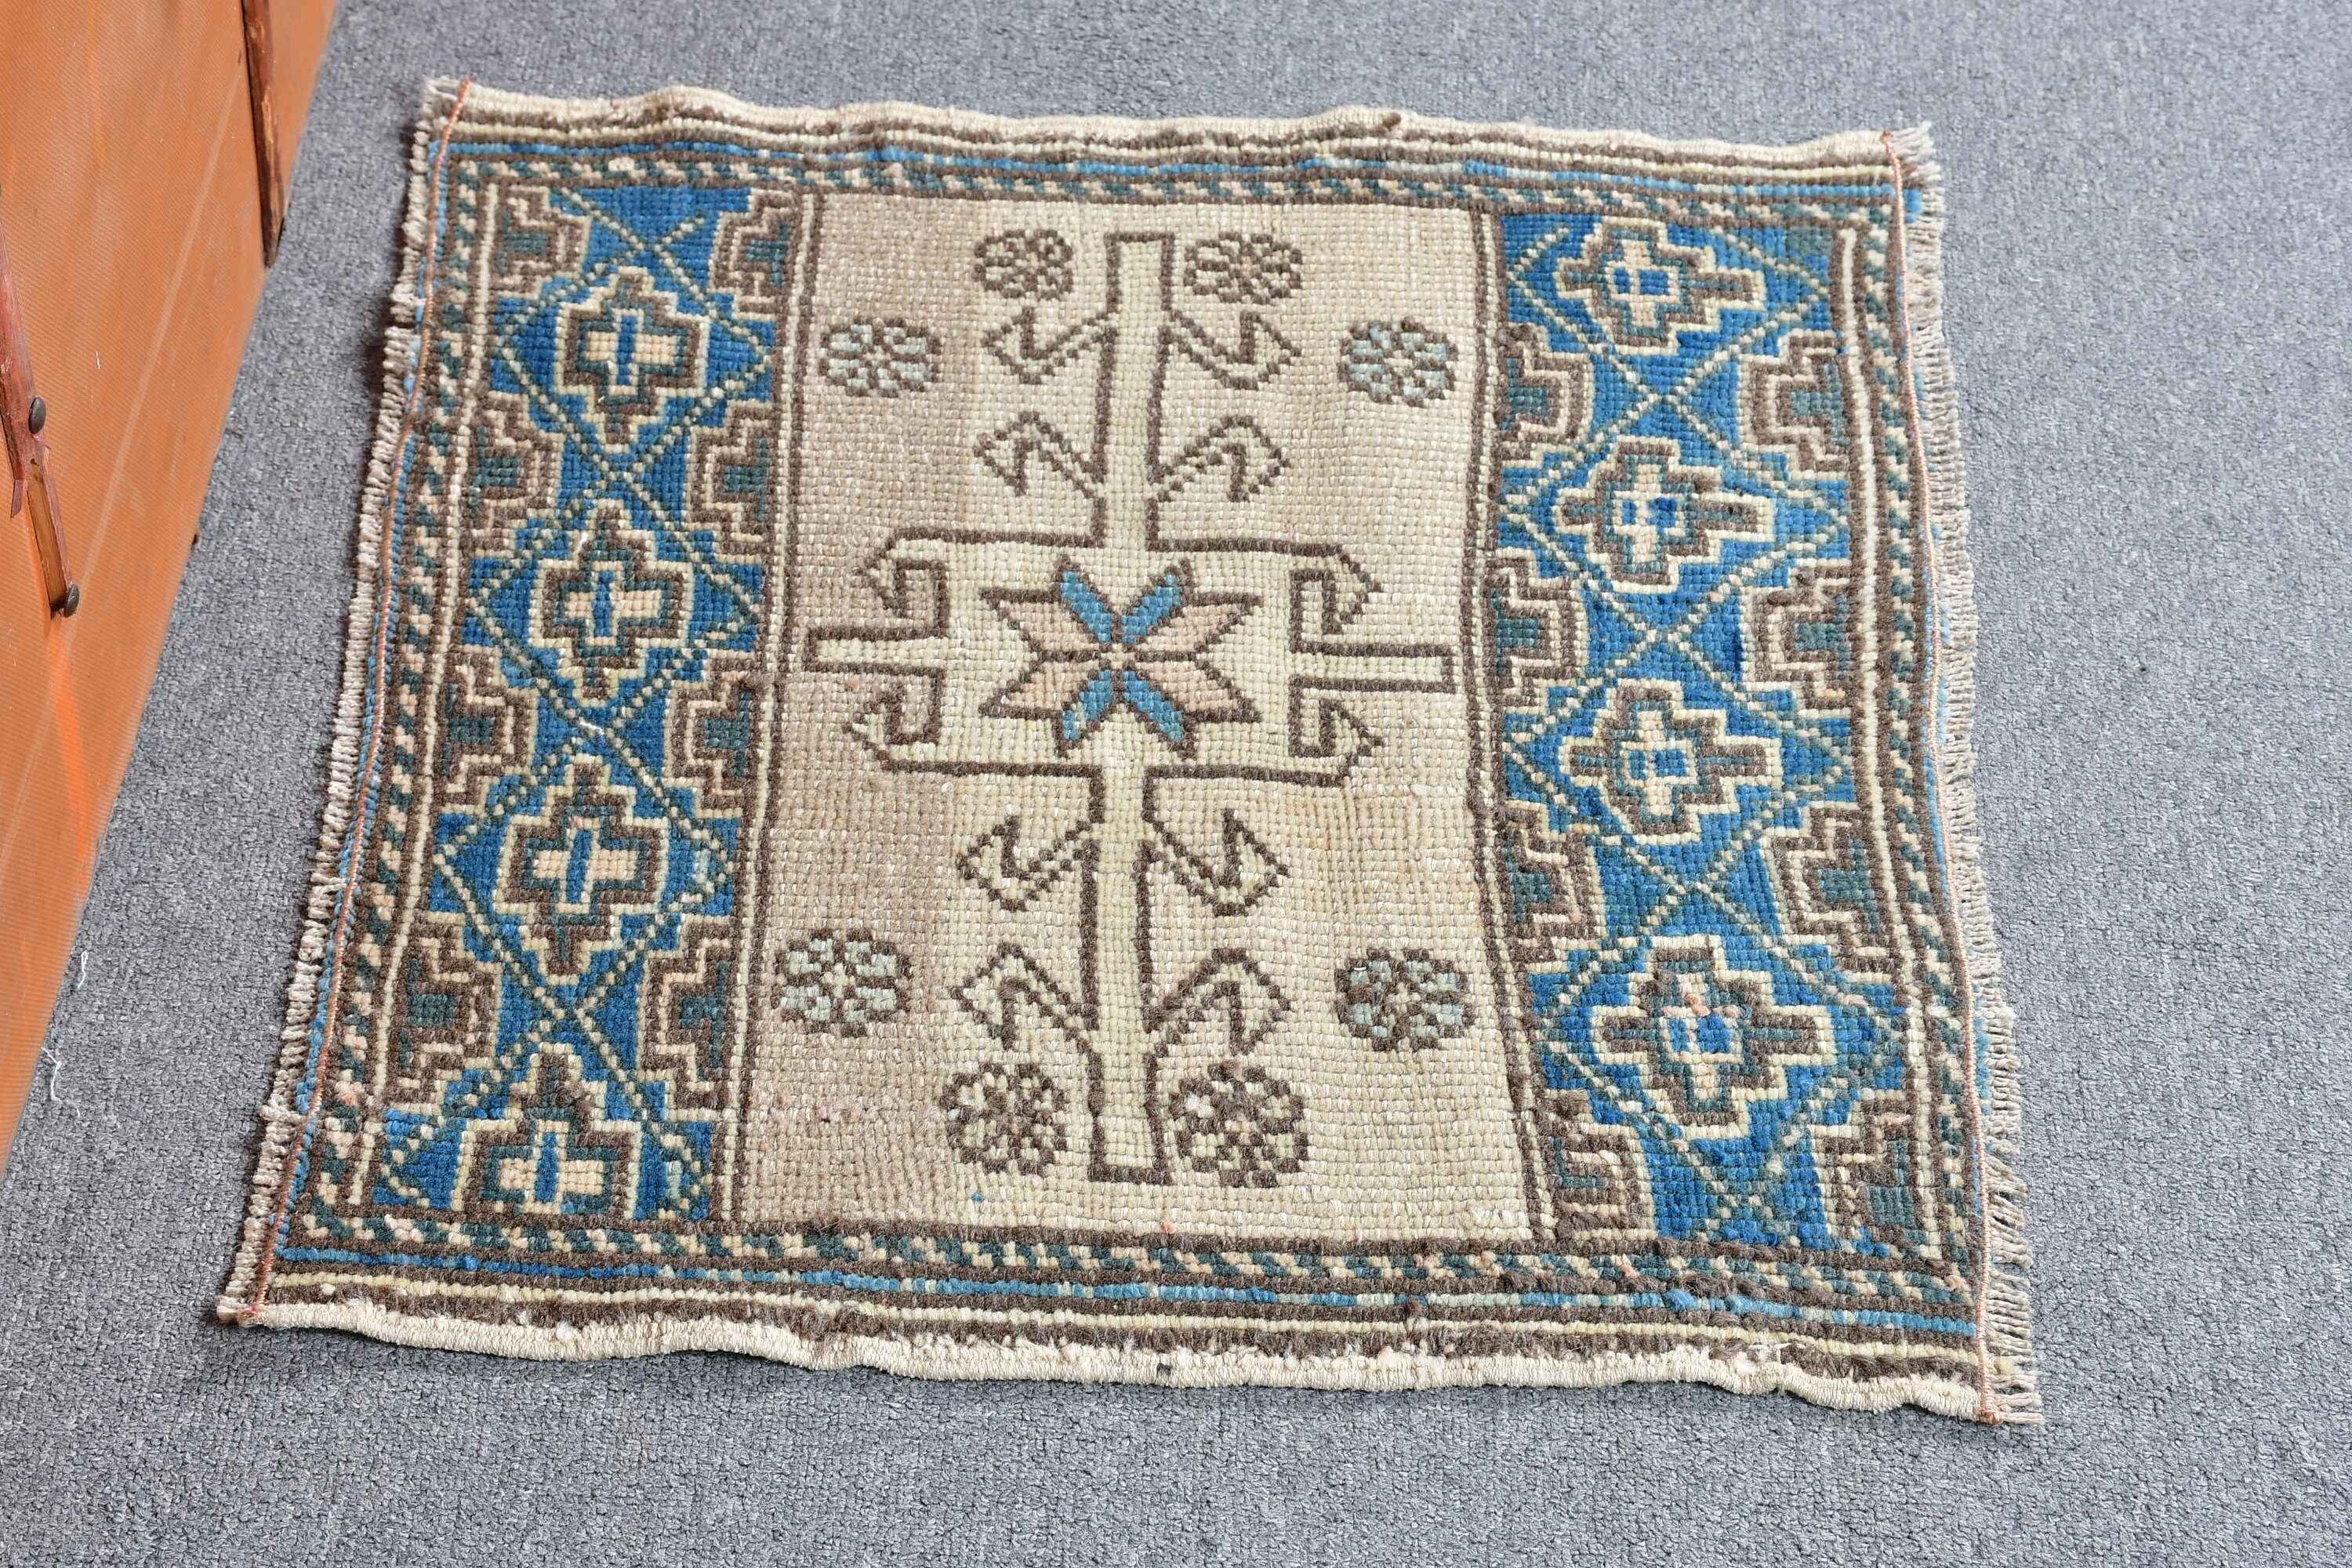 Wool Rugs, Turkish Rug, Anatolian Rug, Vintage Rugs, Rugs for Kitchen, Entry Rug, Brown Home Decor Rugs, Bath Rugs, 2.1x1.8 ft Small Rugs